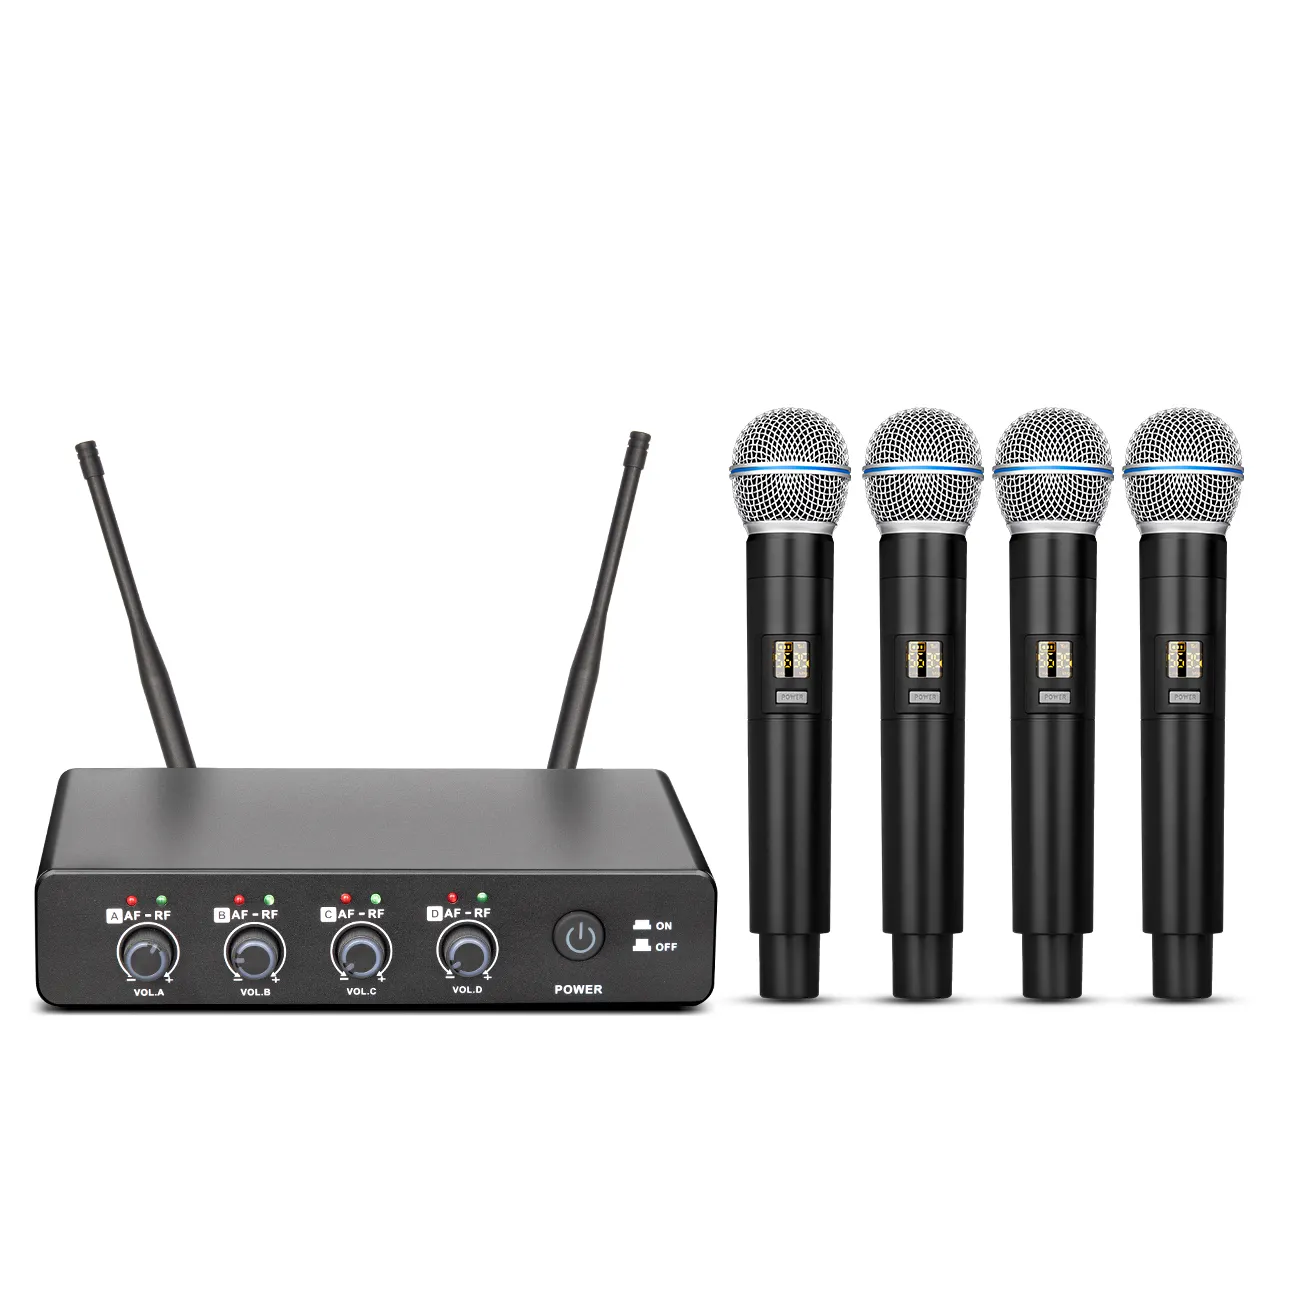 Biner R4 Professional Handheld Best UHF Wireless Microphone Dynamic Microphone For Conference Room